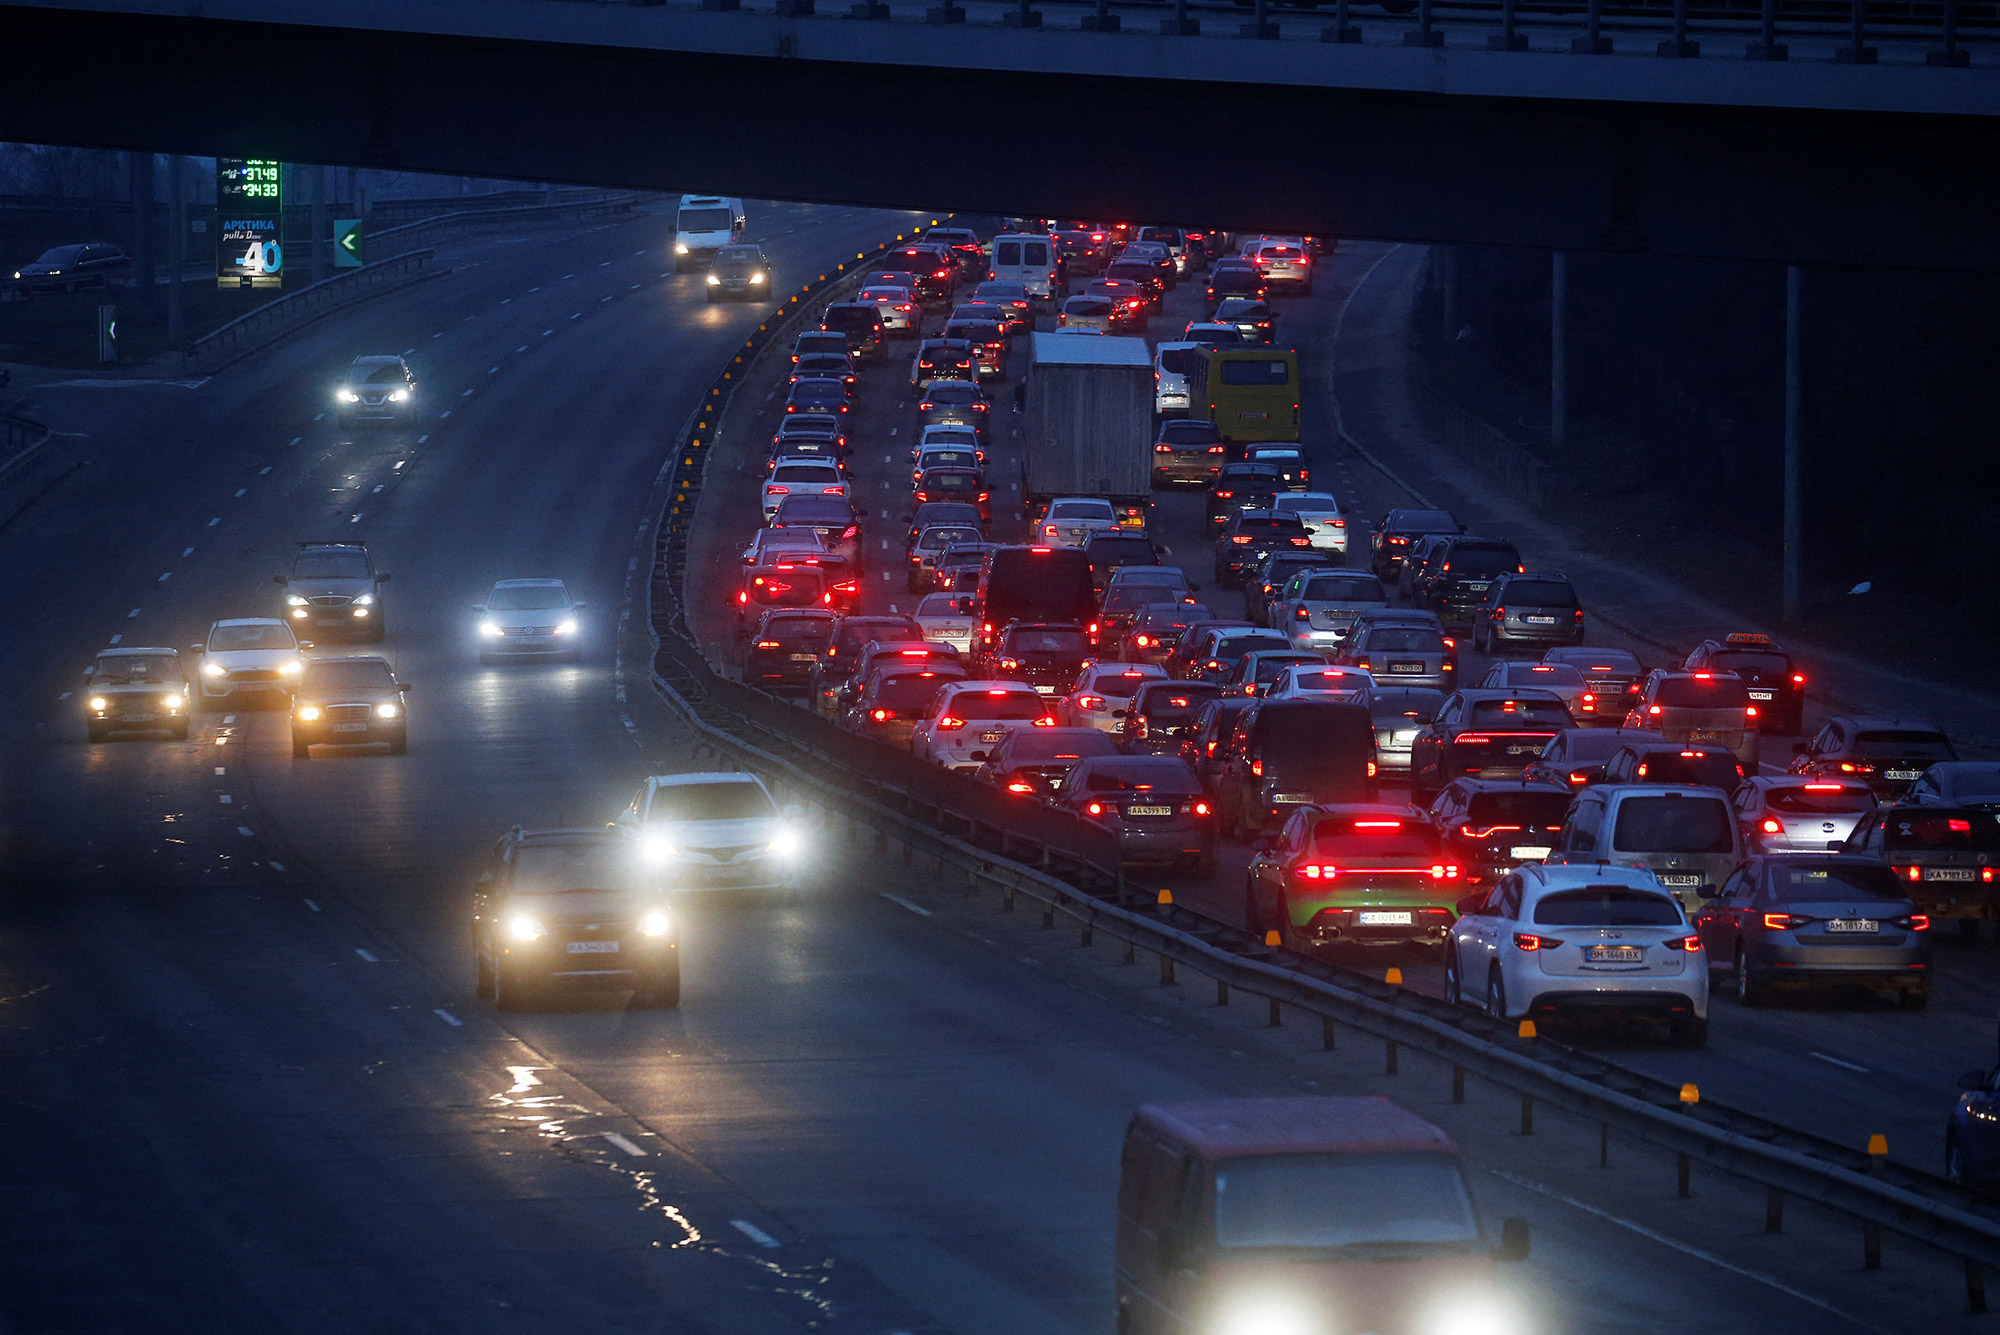 A long line of cars is seen exiting Kyiv on February 24. Heavy traffic appeared to be heading west, away from where explosions were heard early in the morning.